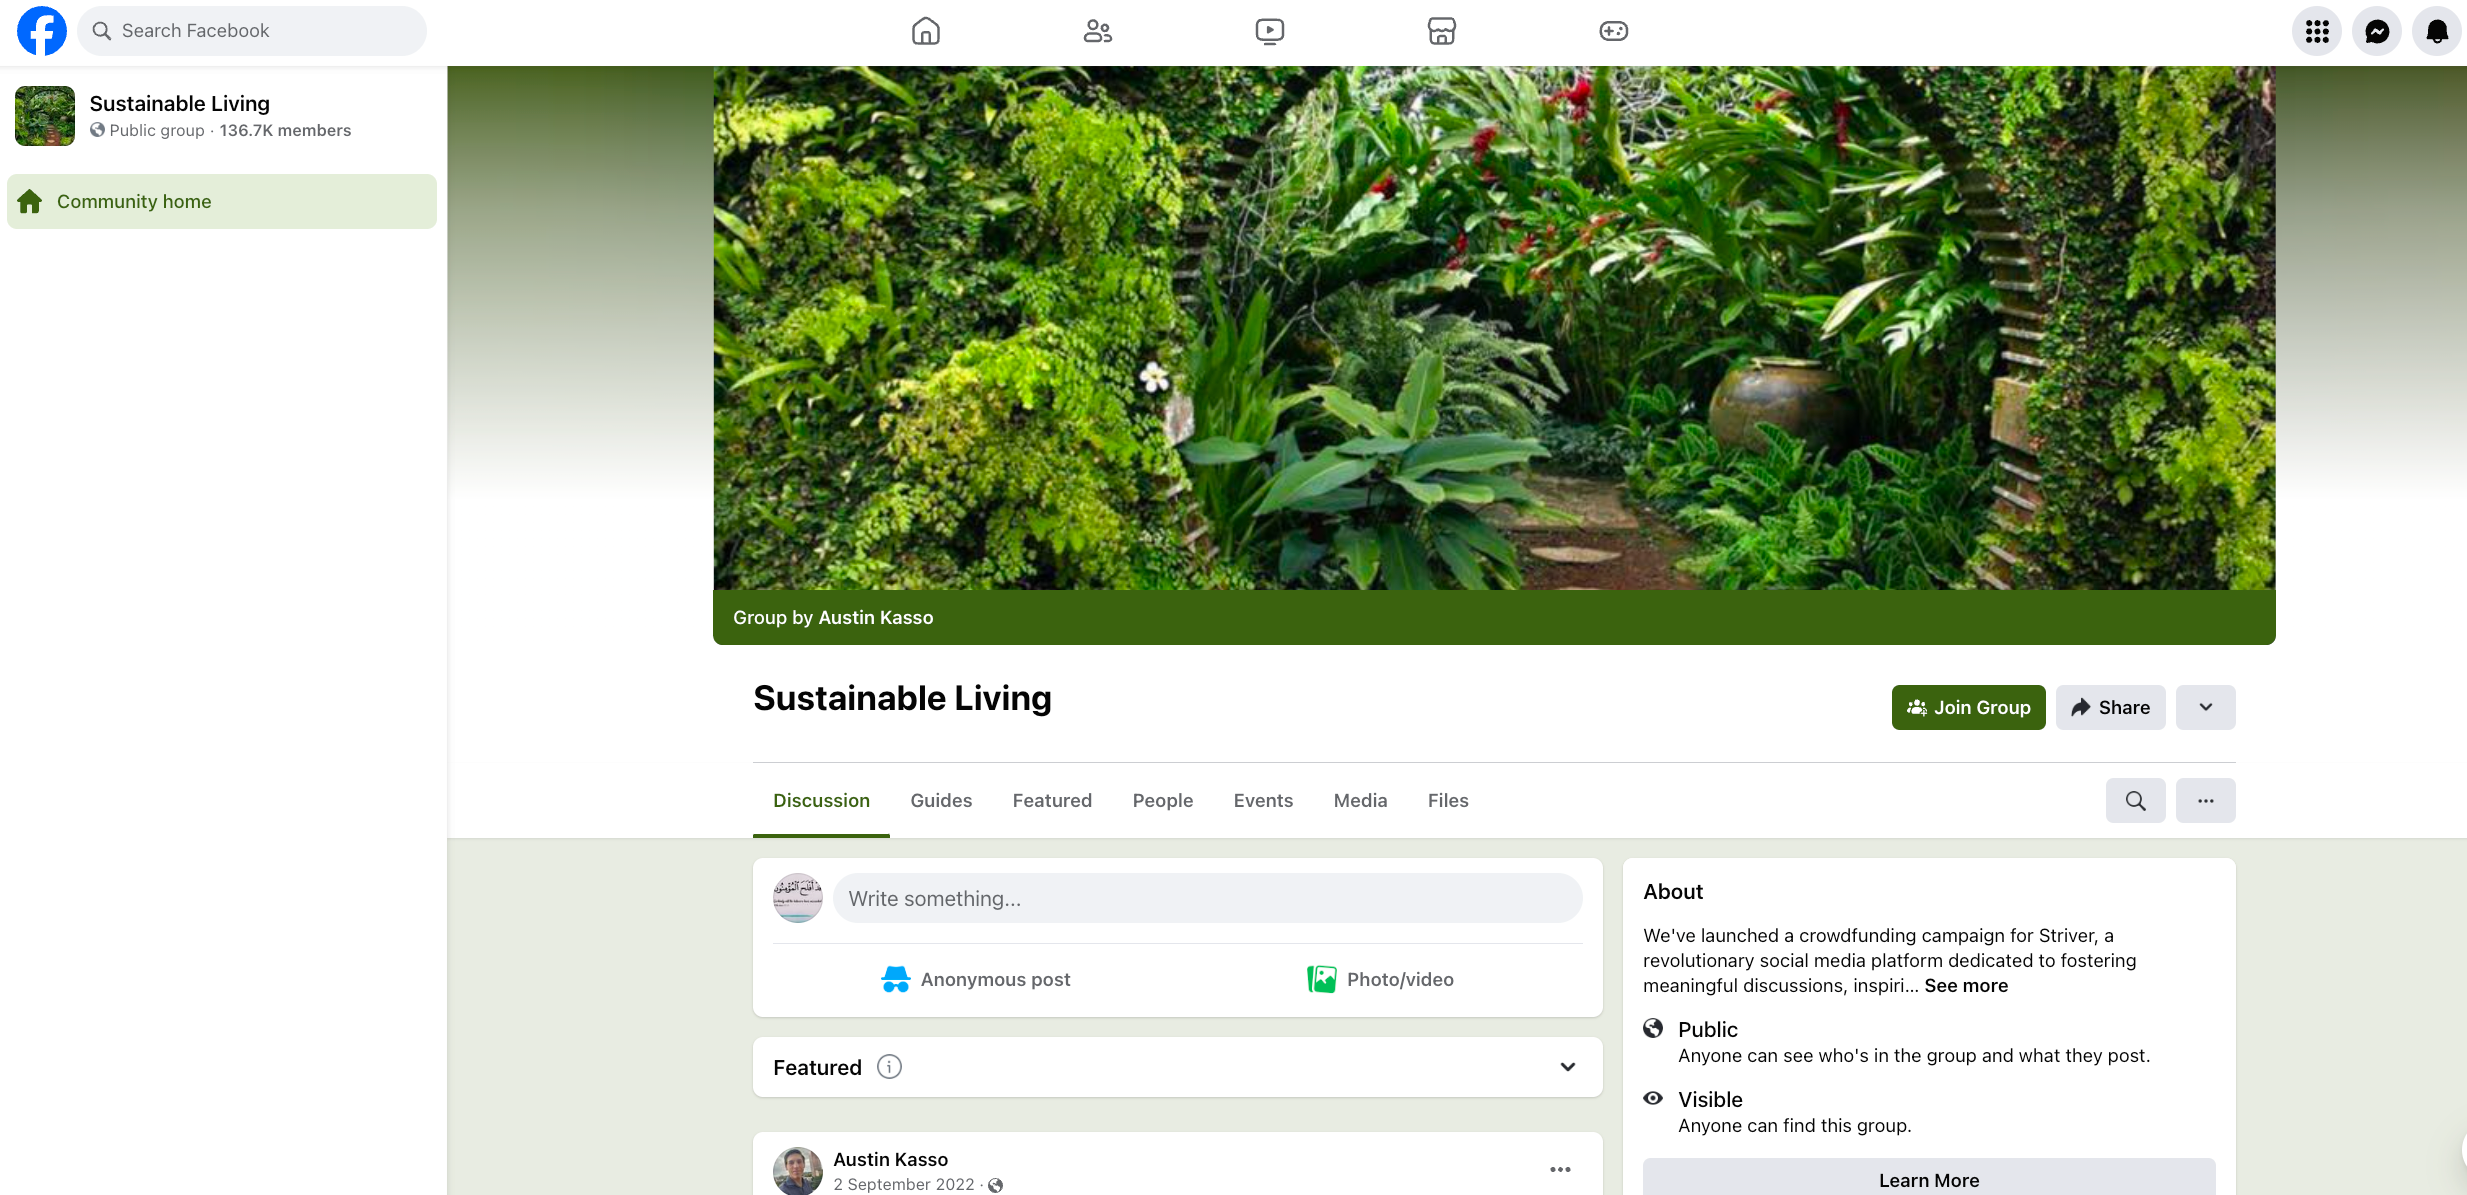 Sustainable Living Group